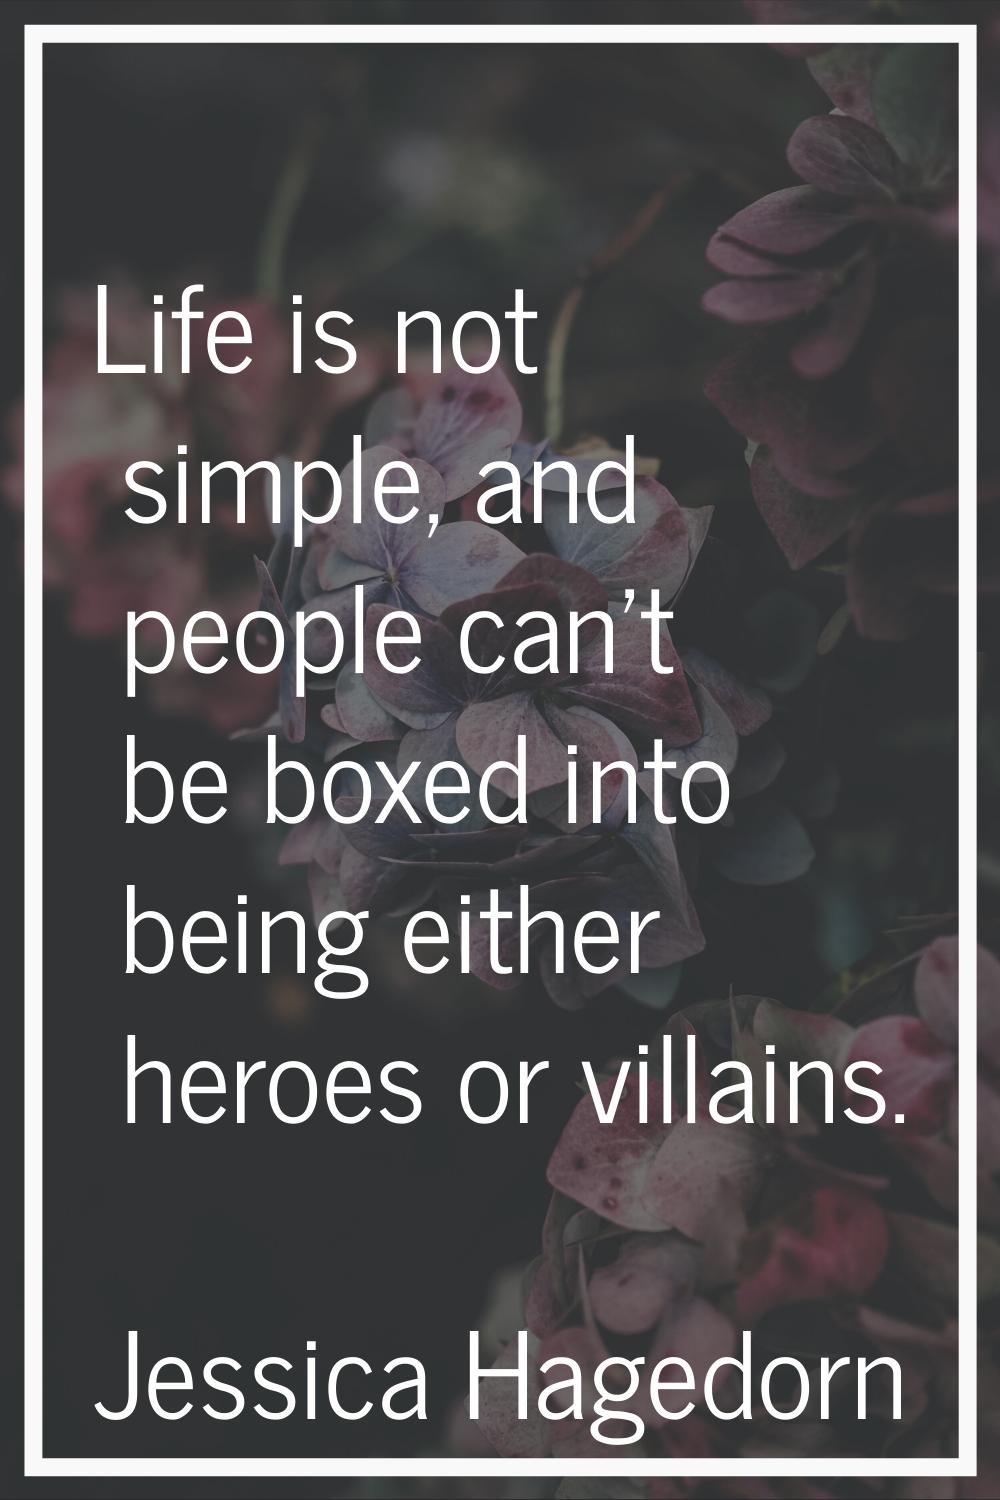 Life is not simple, and people can't be boxed into being either heroes or villains.